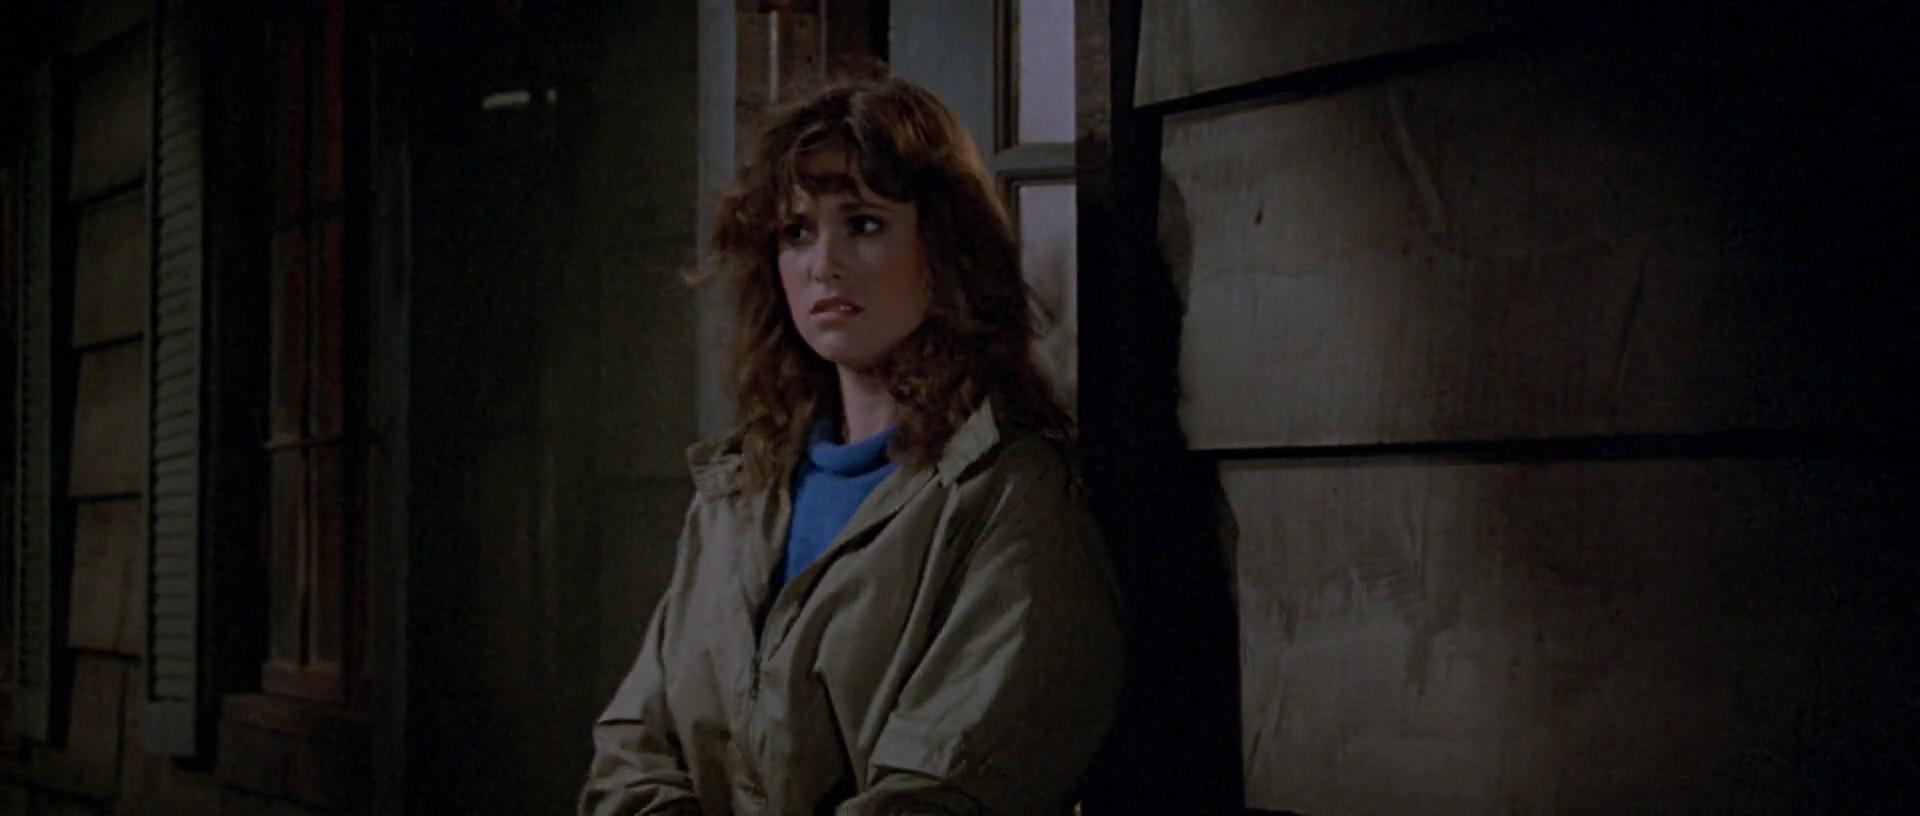 Dana Kimmell in Friday the 13th Part III (1982) .